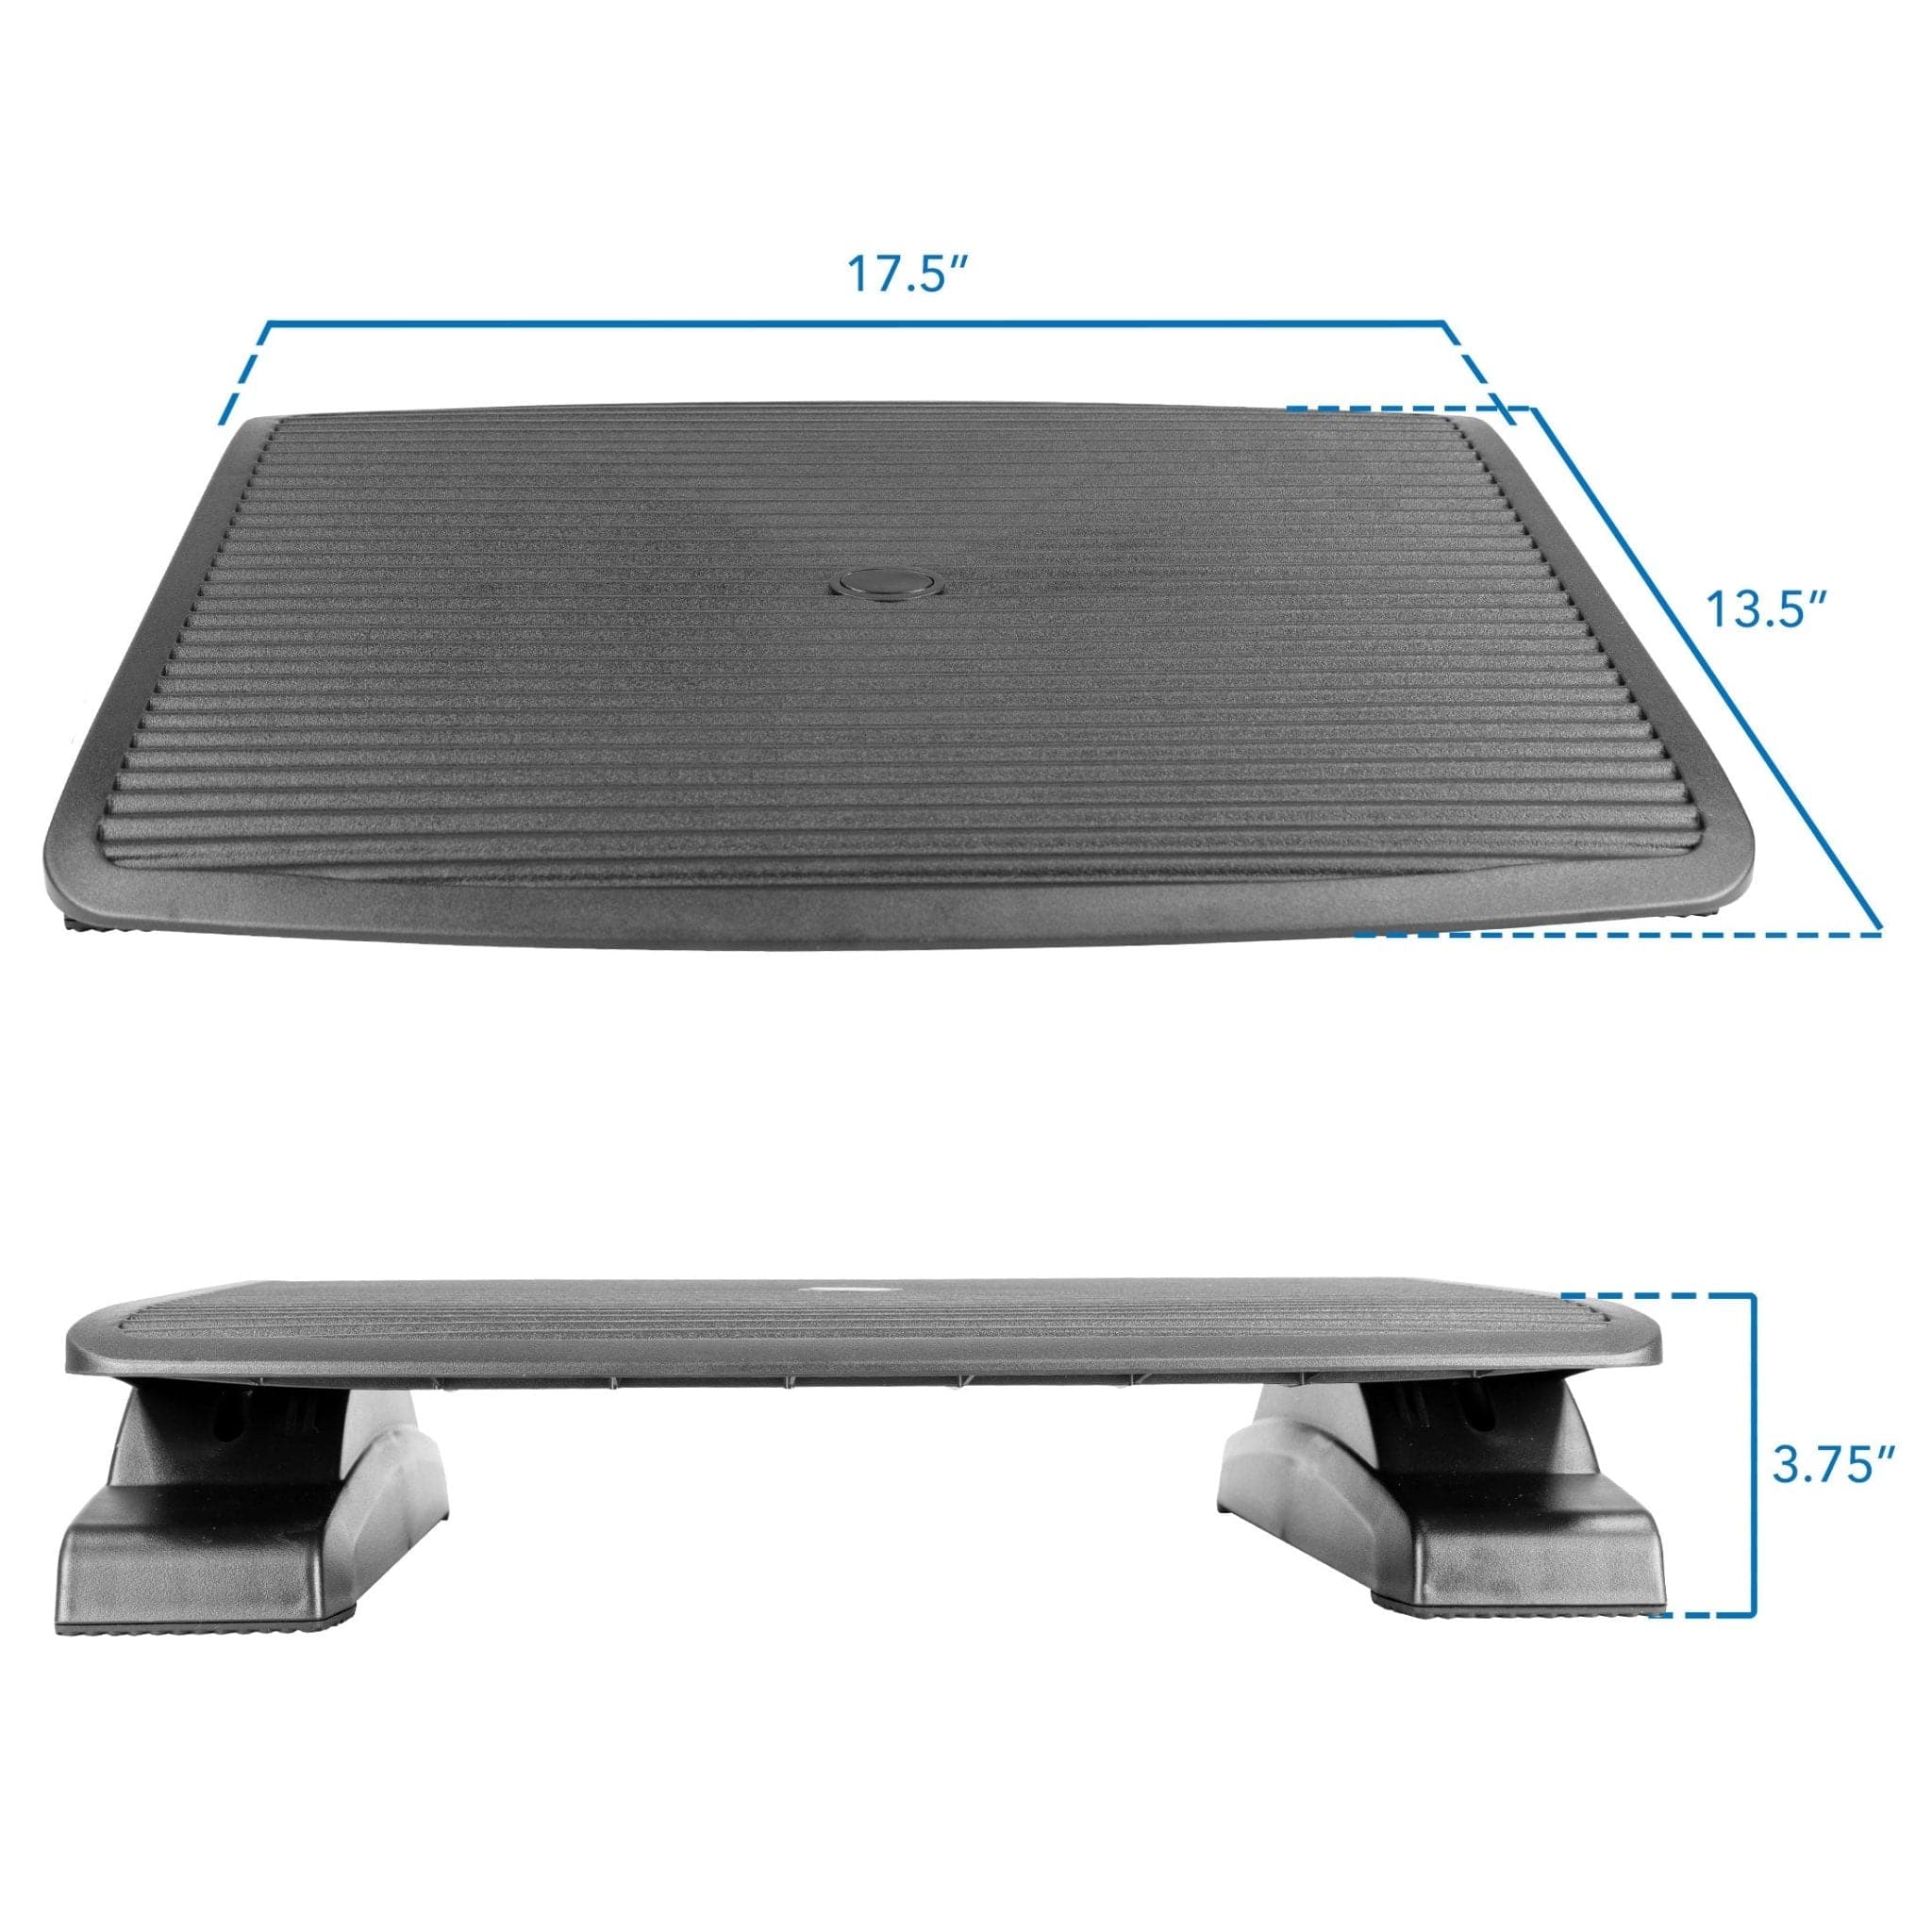 Mount-it! Ergonomic Footrest For Office Or Home